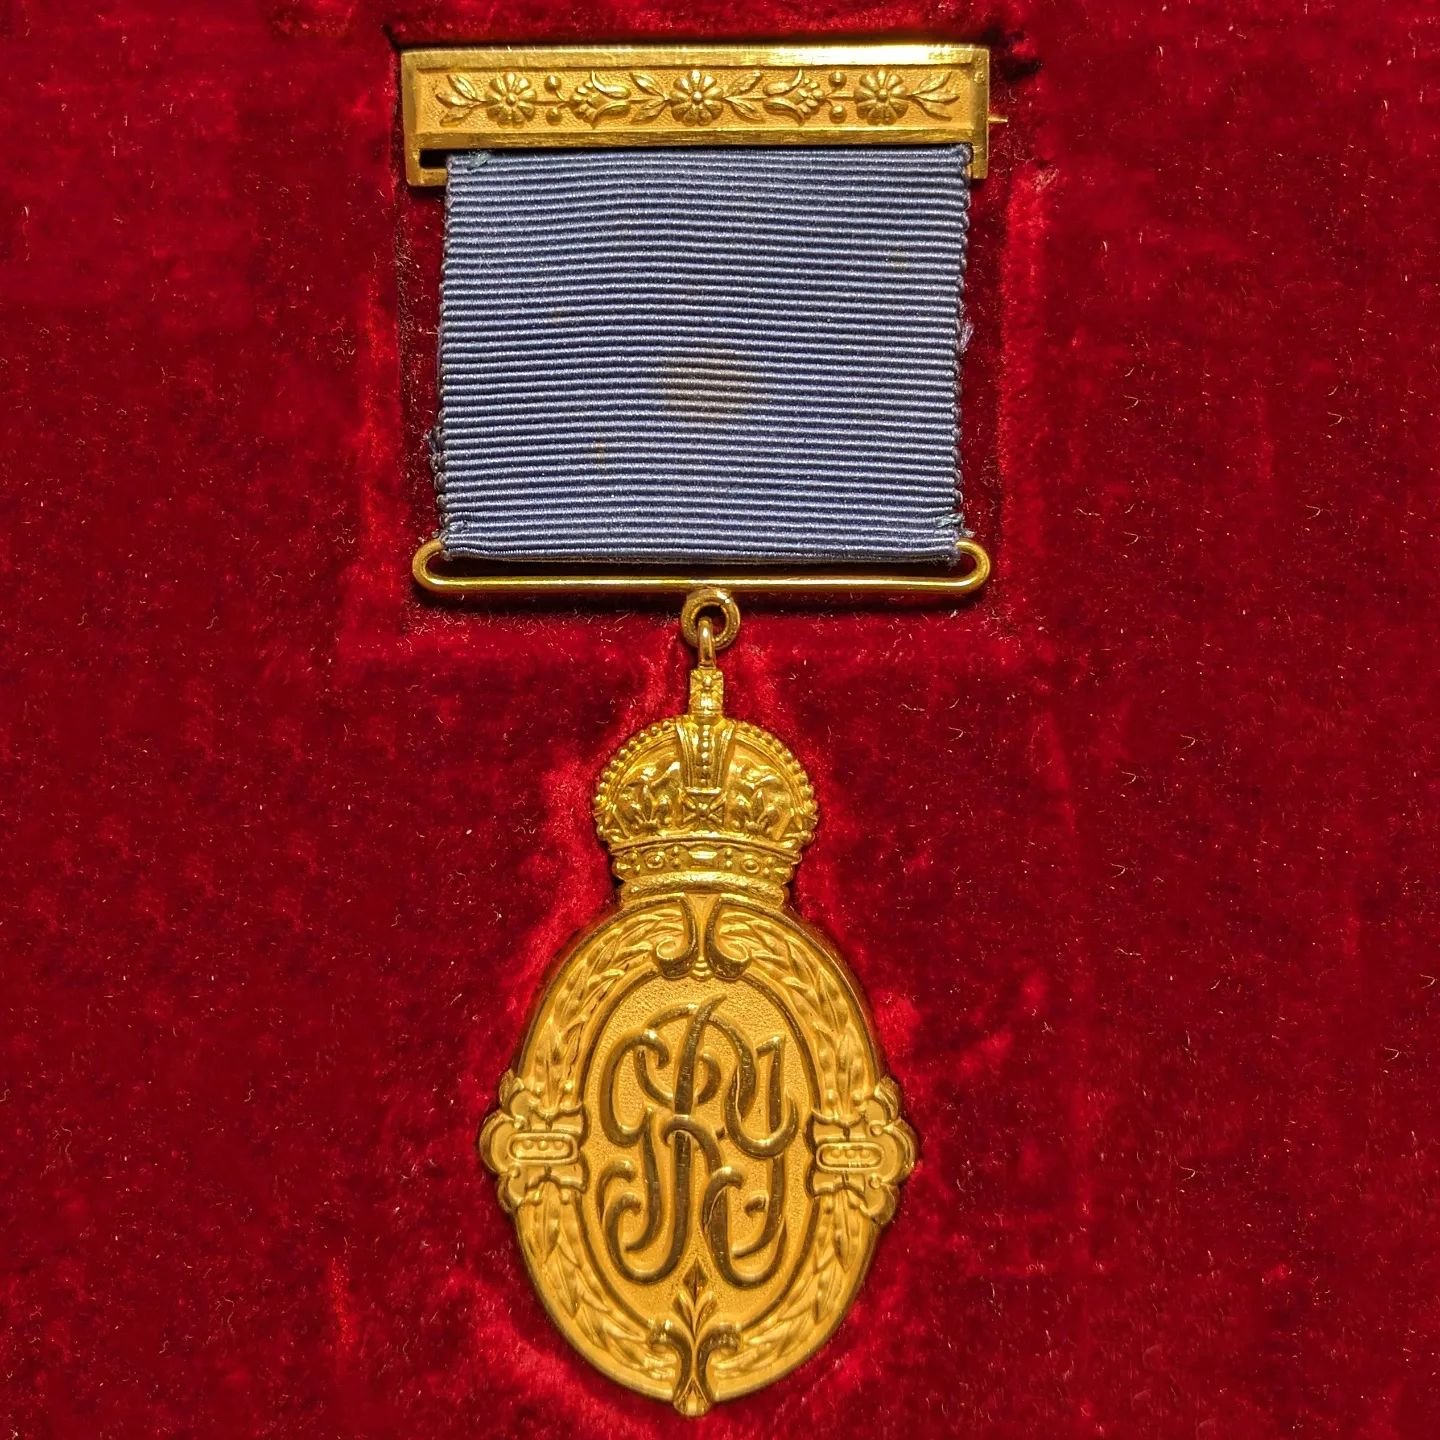 .

A rare Kasar-I-Hind medal in gold
Likely awarded to Rev A.L. Bradbury for missionary work in India and the construction of The Holy Name Cathedral, Hubli, in 1928.

In 1919, A L Bradbury was posted to India to preach and train the community as wel